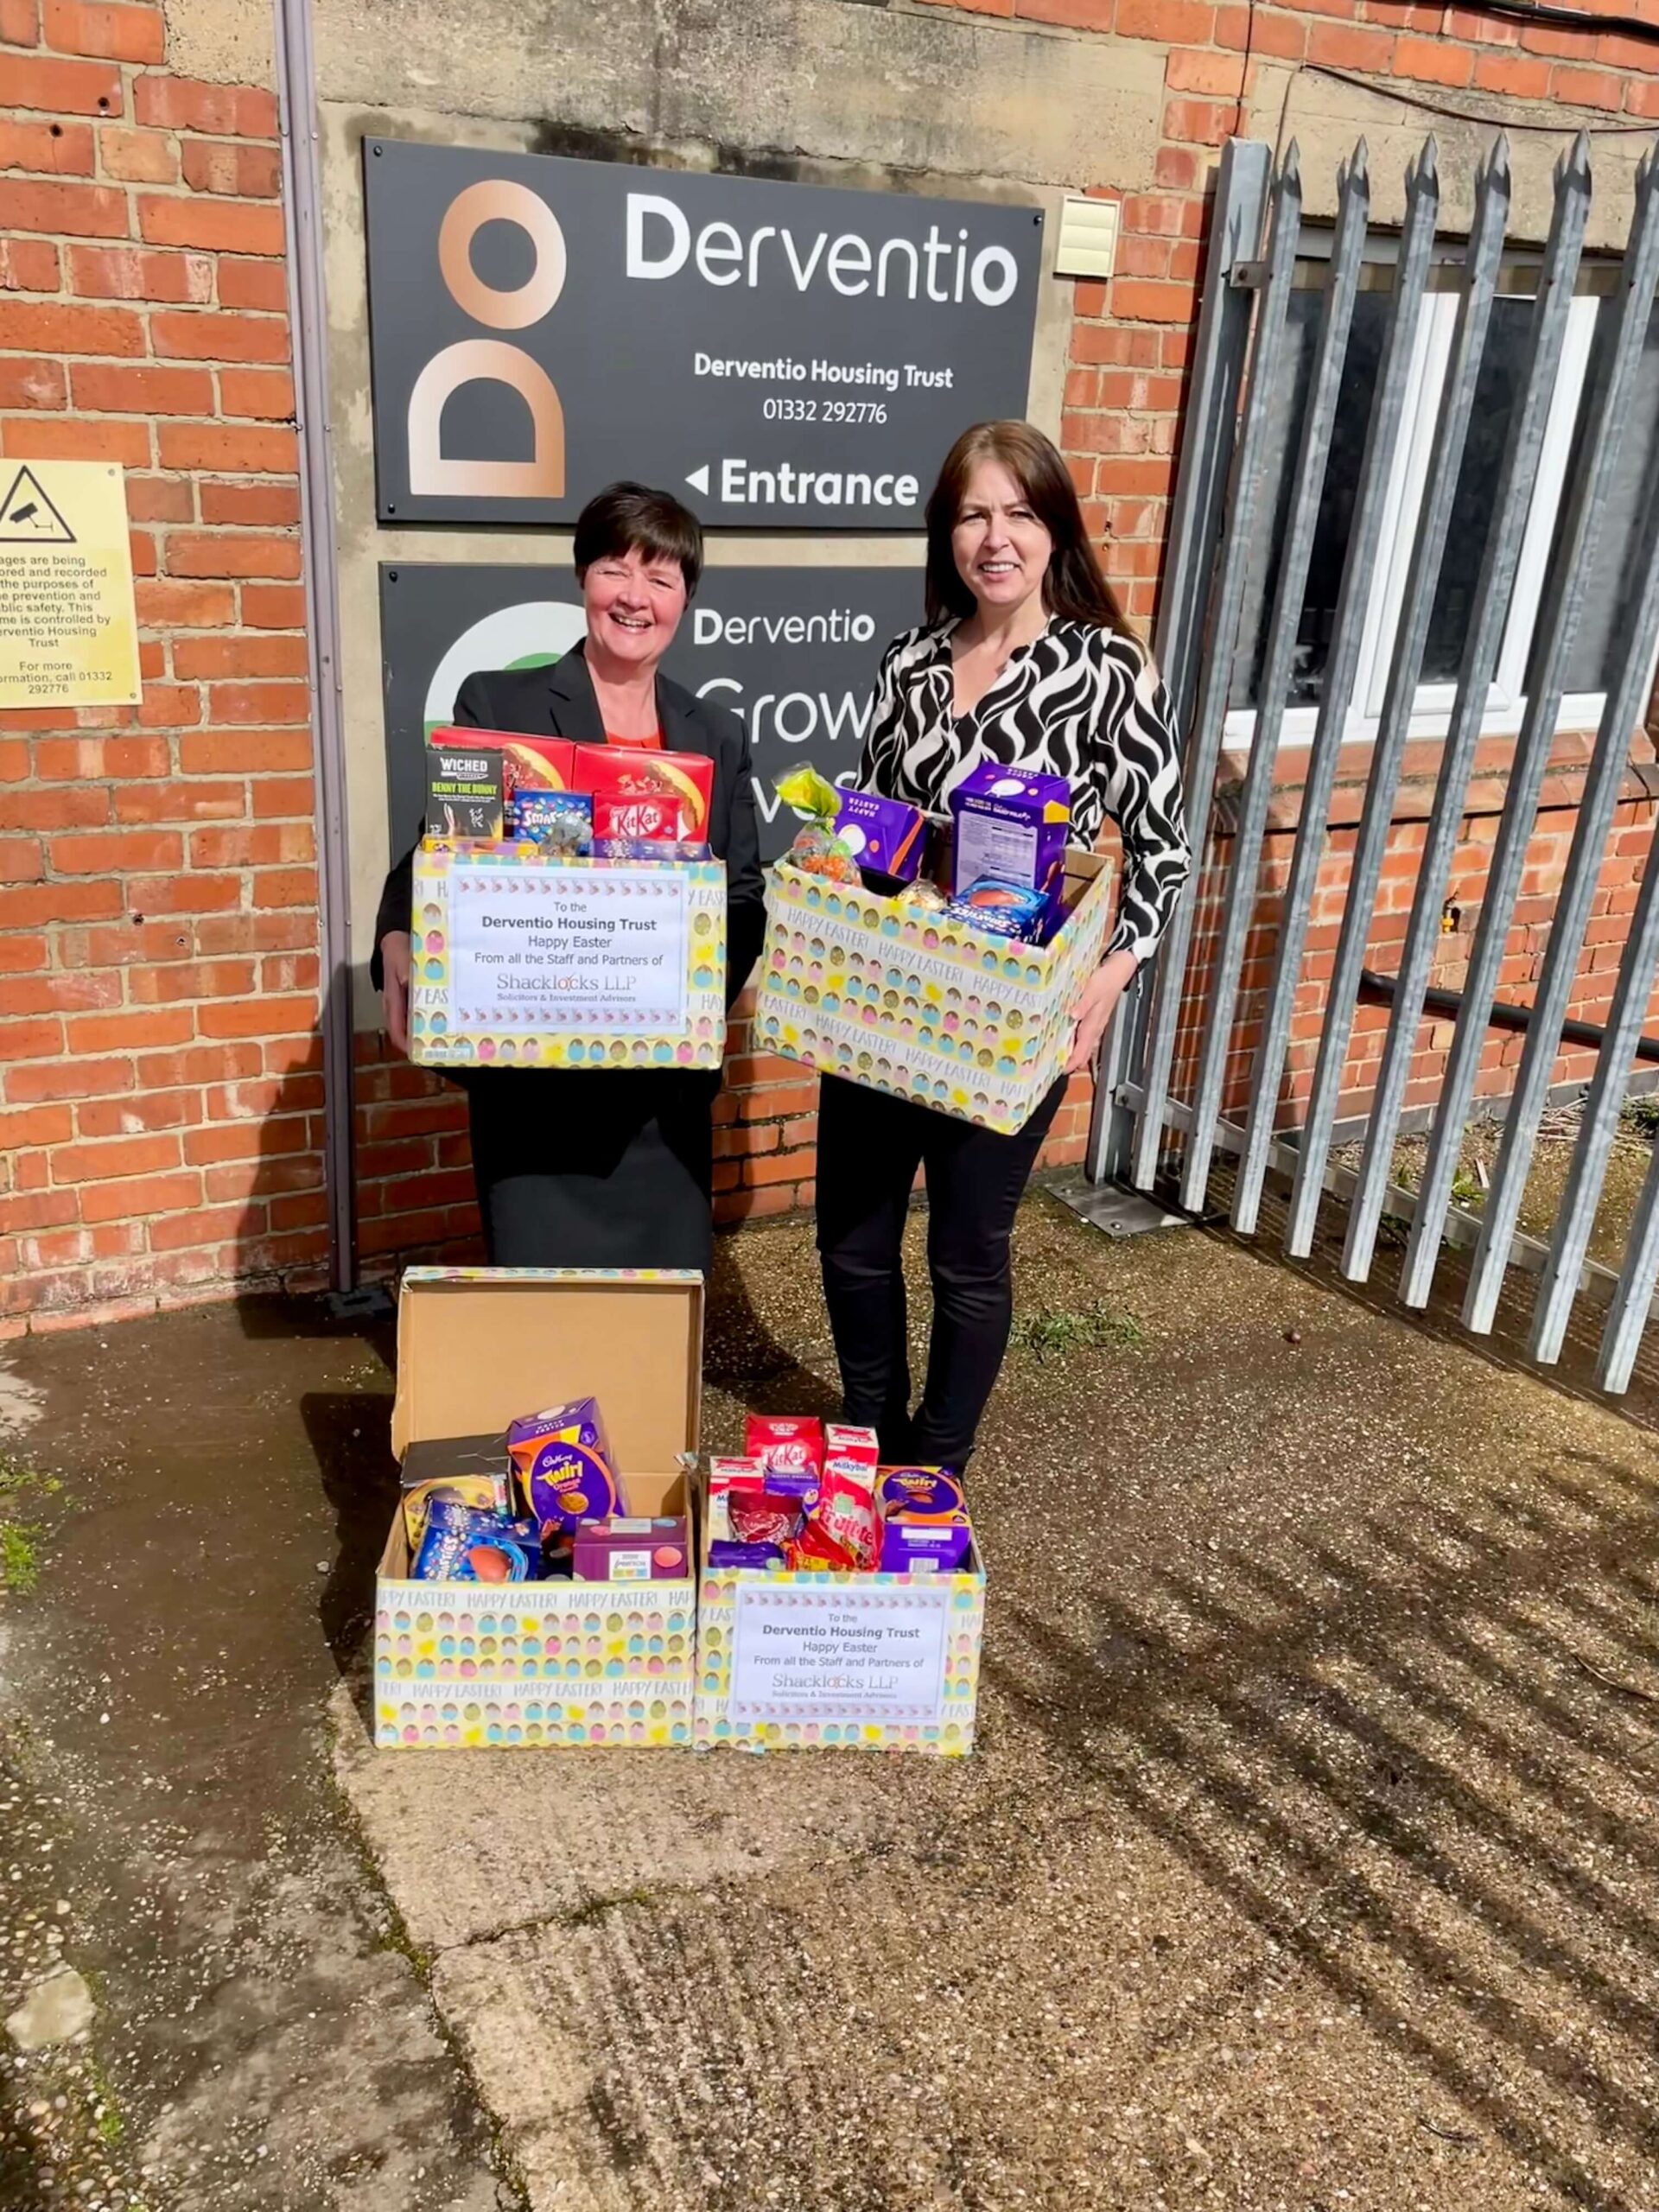 Egg-cellent Easter donations from companies featured image